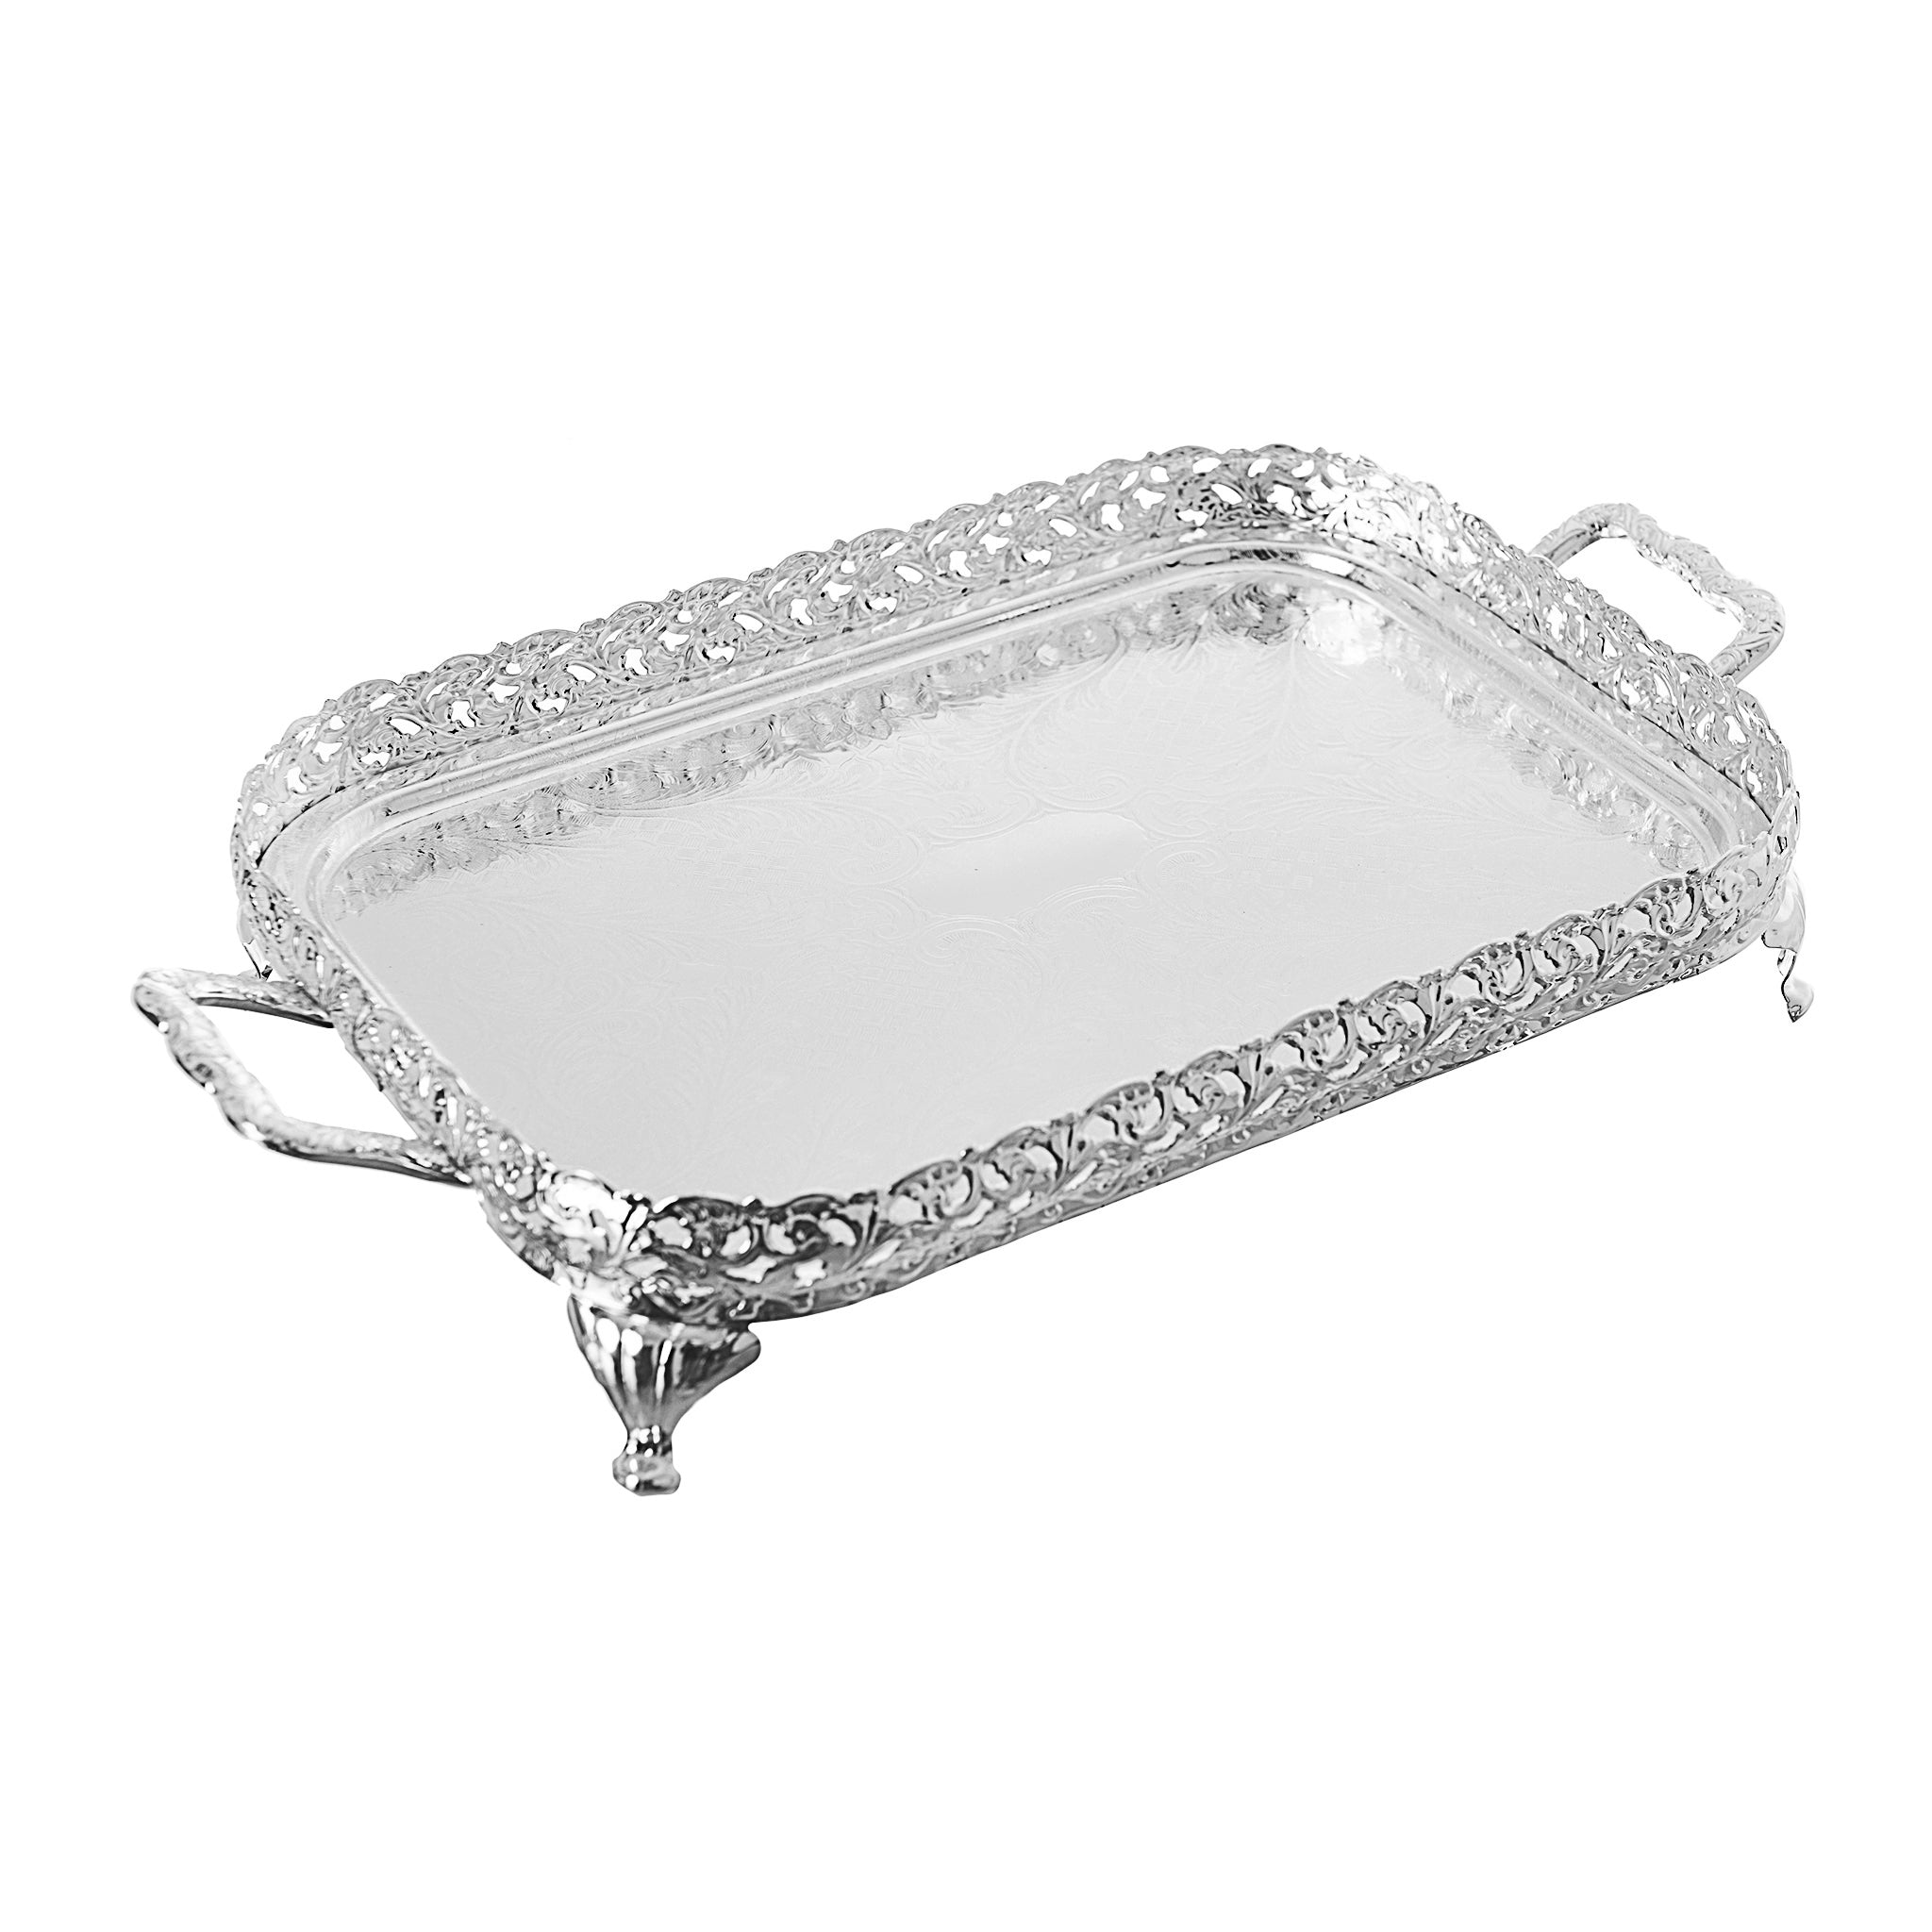 Queen Anne - Rectangular Tray with Handles & Legs - Silver Plated Metal - 43x24cm - 26000270